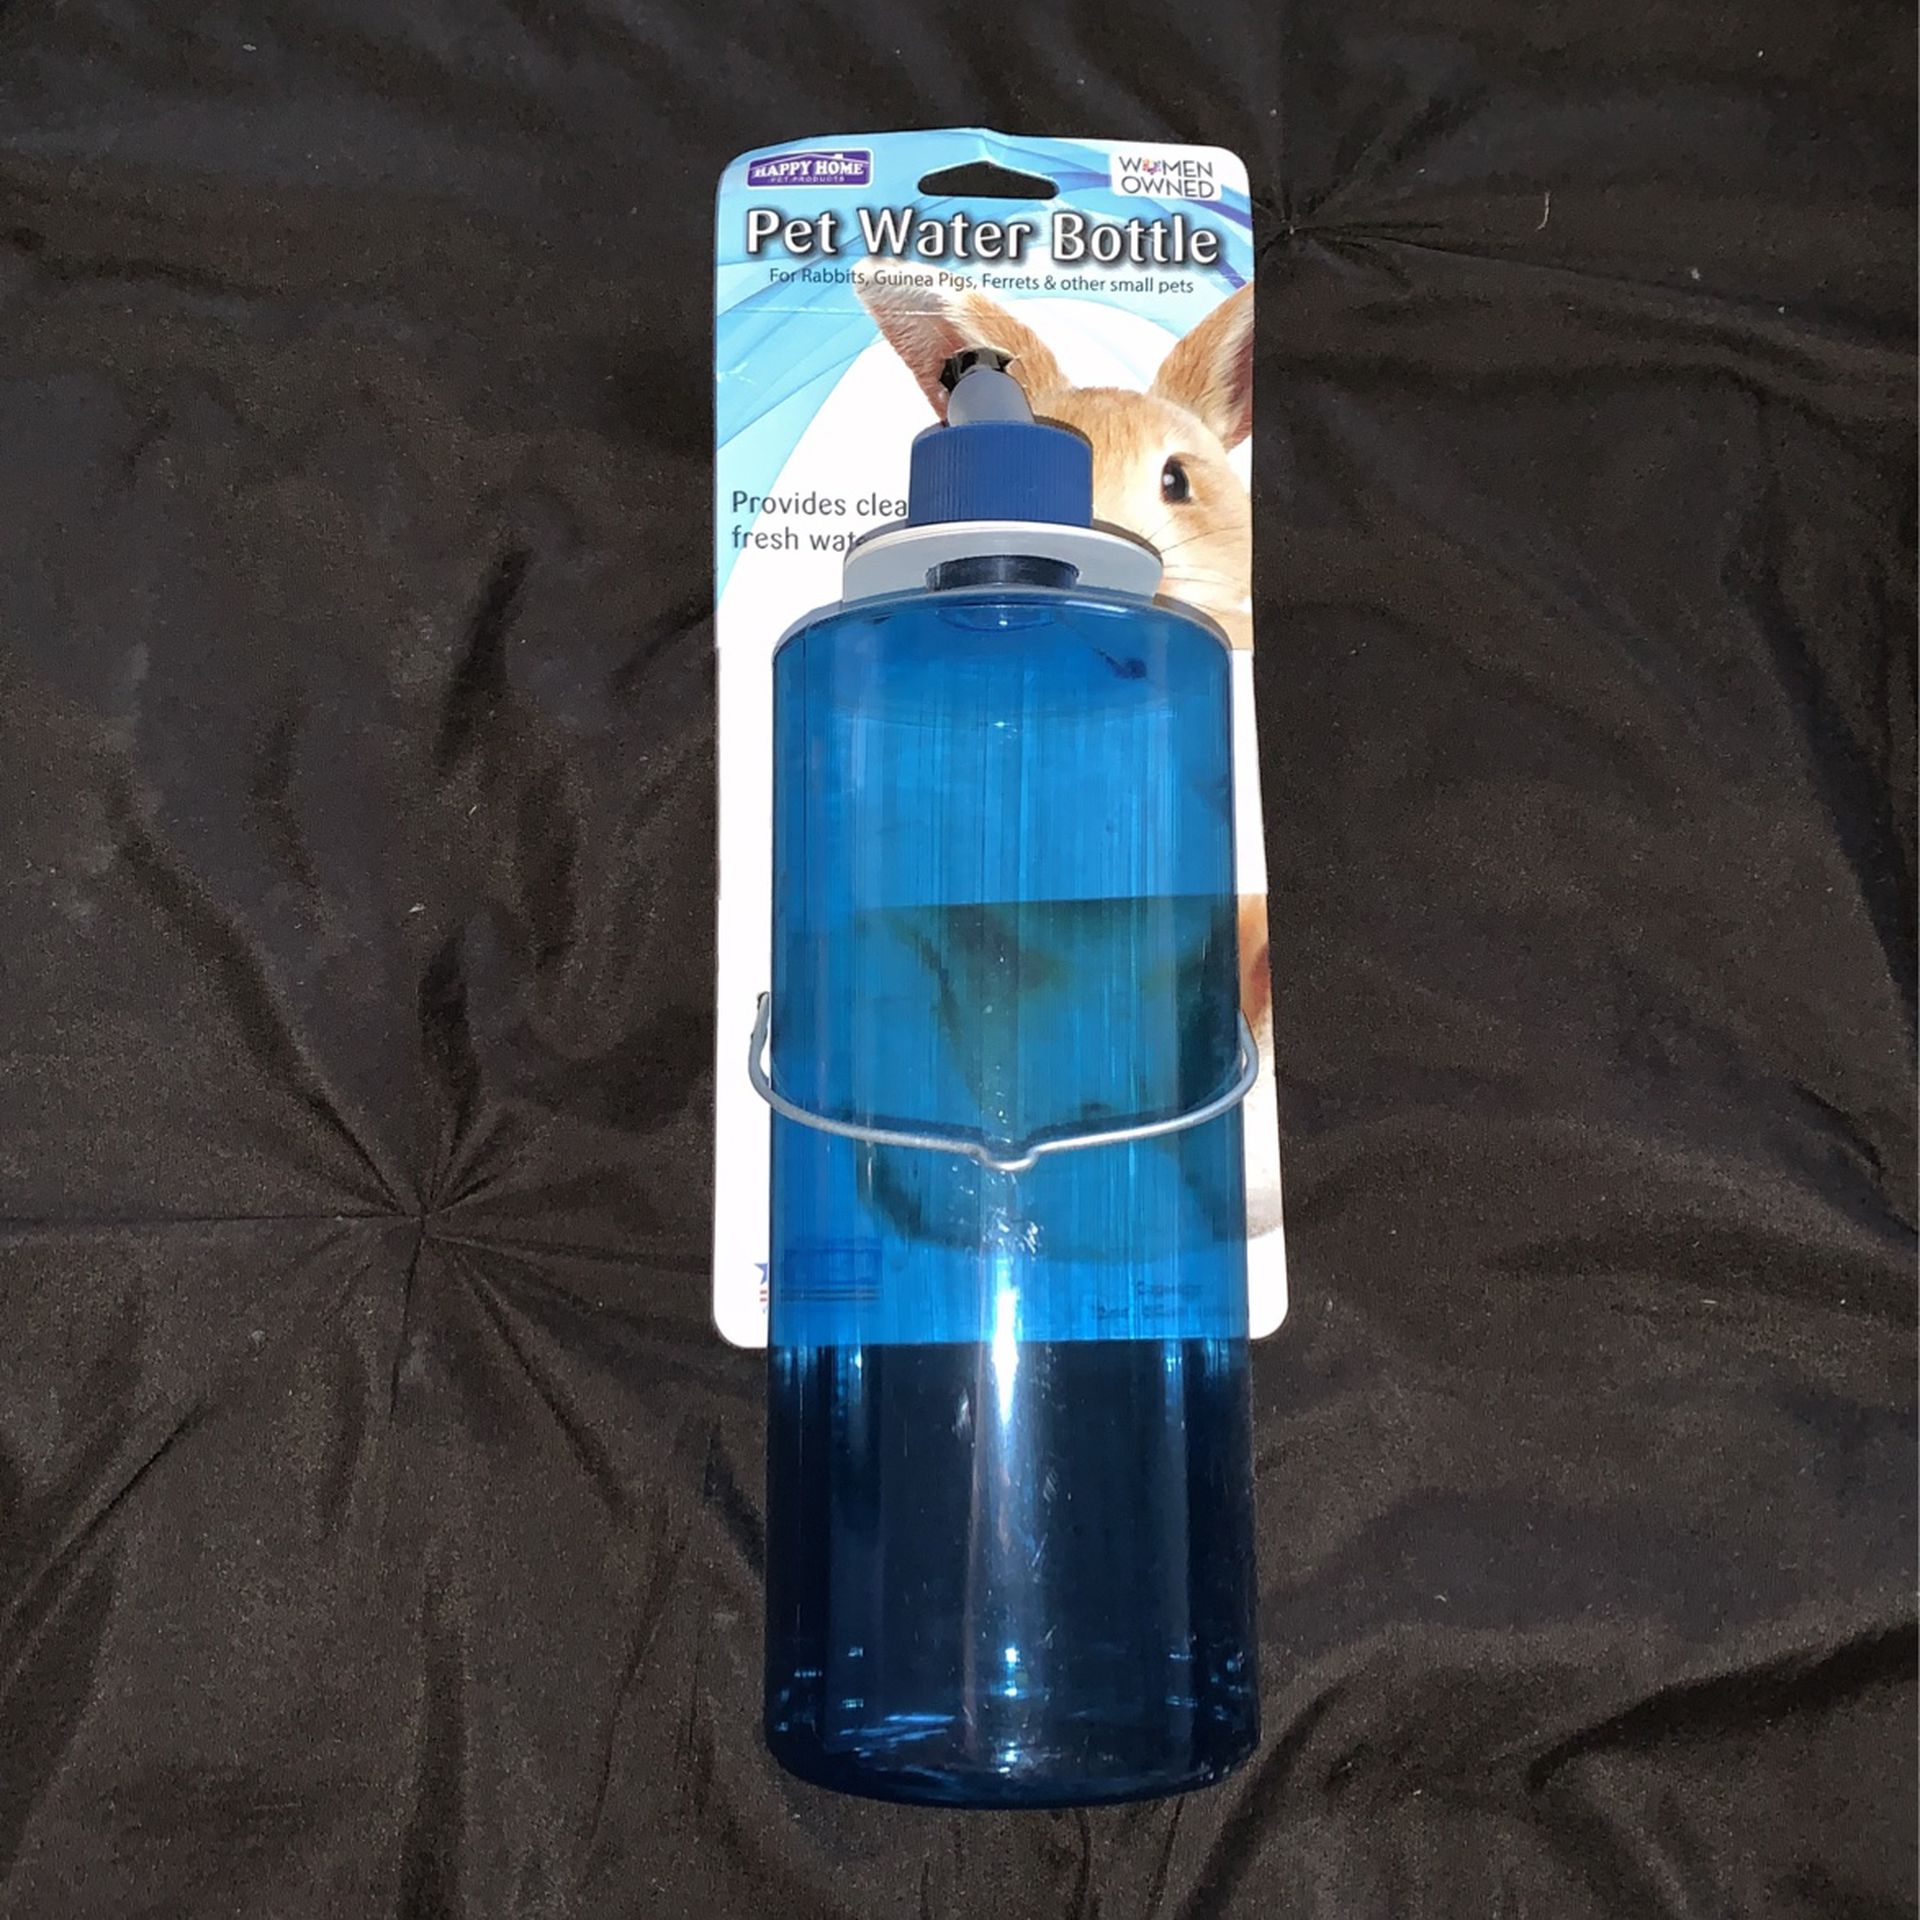 Happy Home Pet Water Bottle for Small Animals, Blue